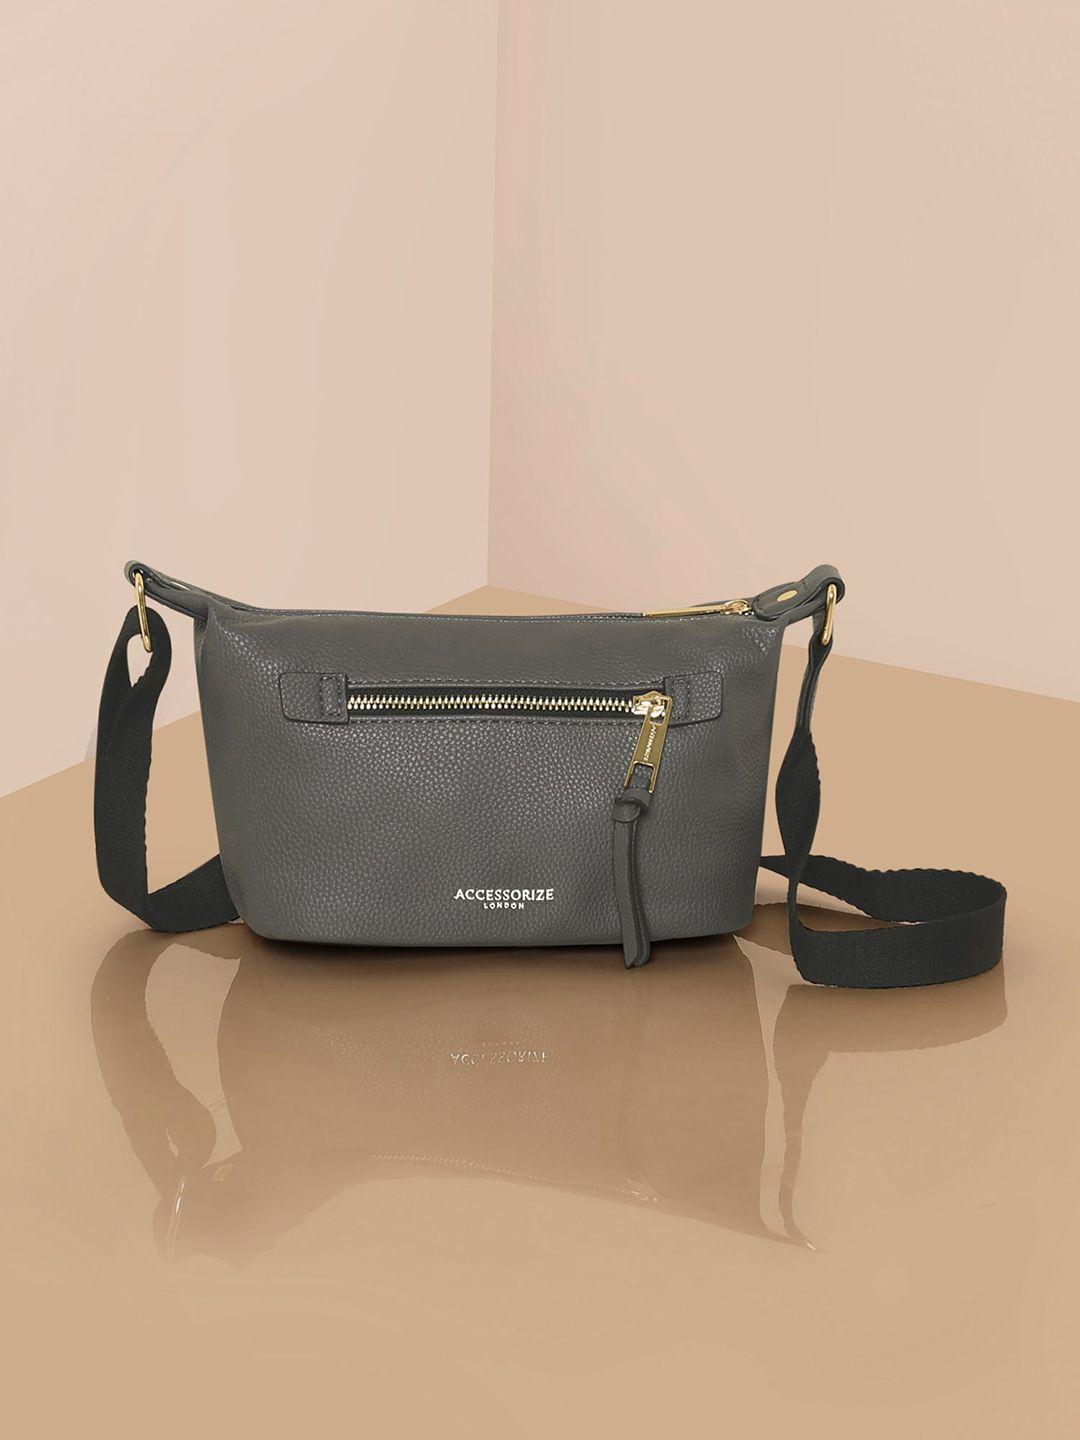 ACCESSORIZE LONDON PU Structured Shoulder Bag with Tasselled